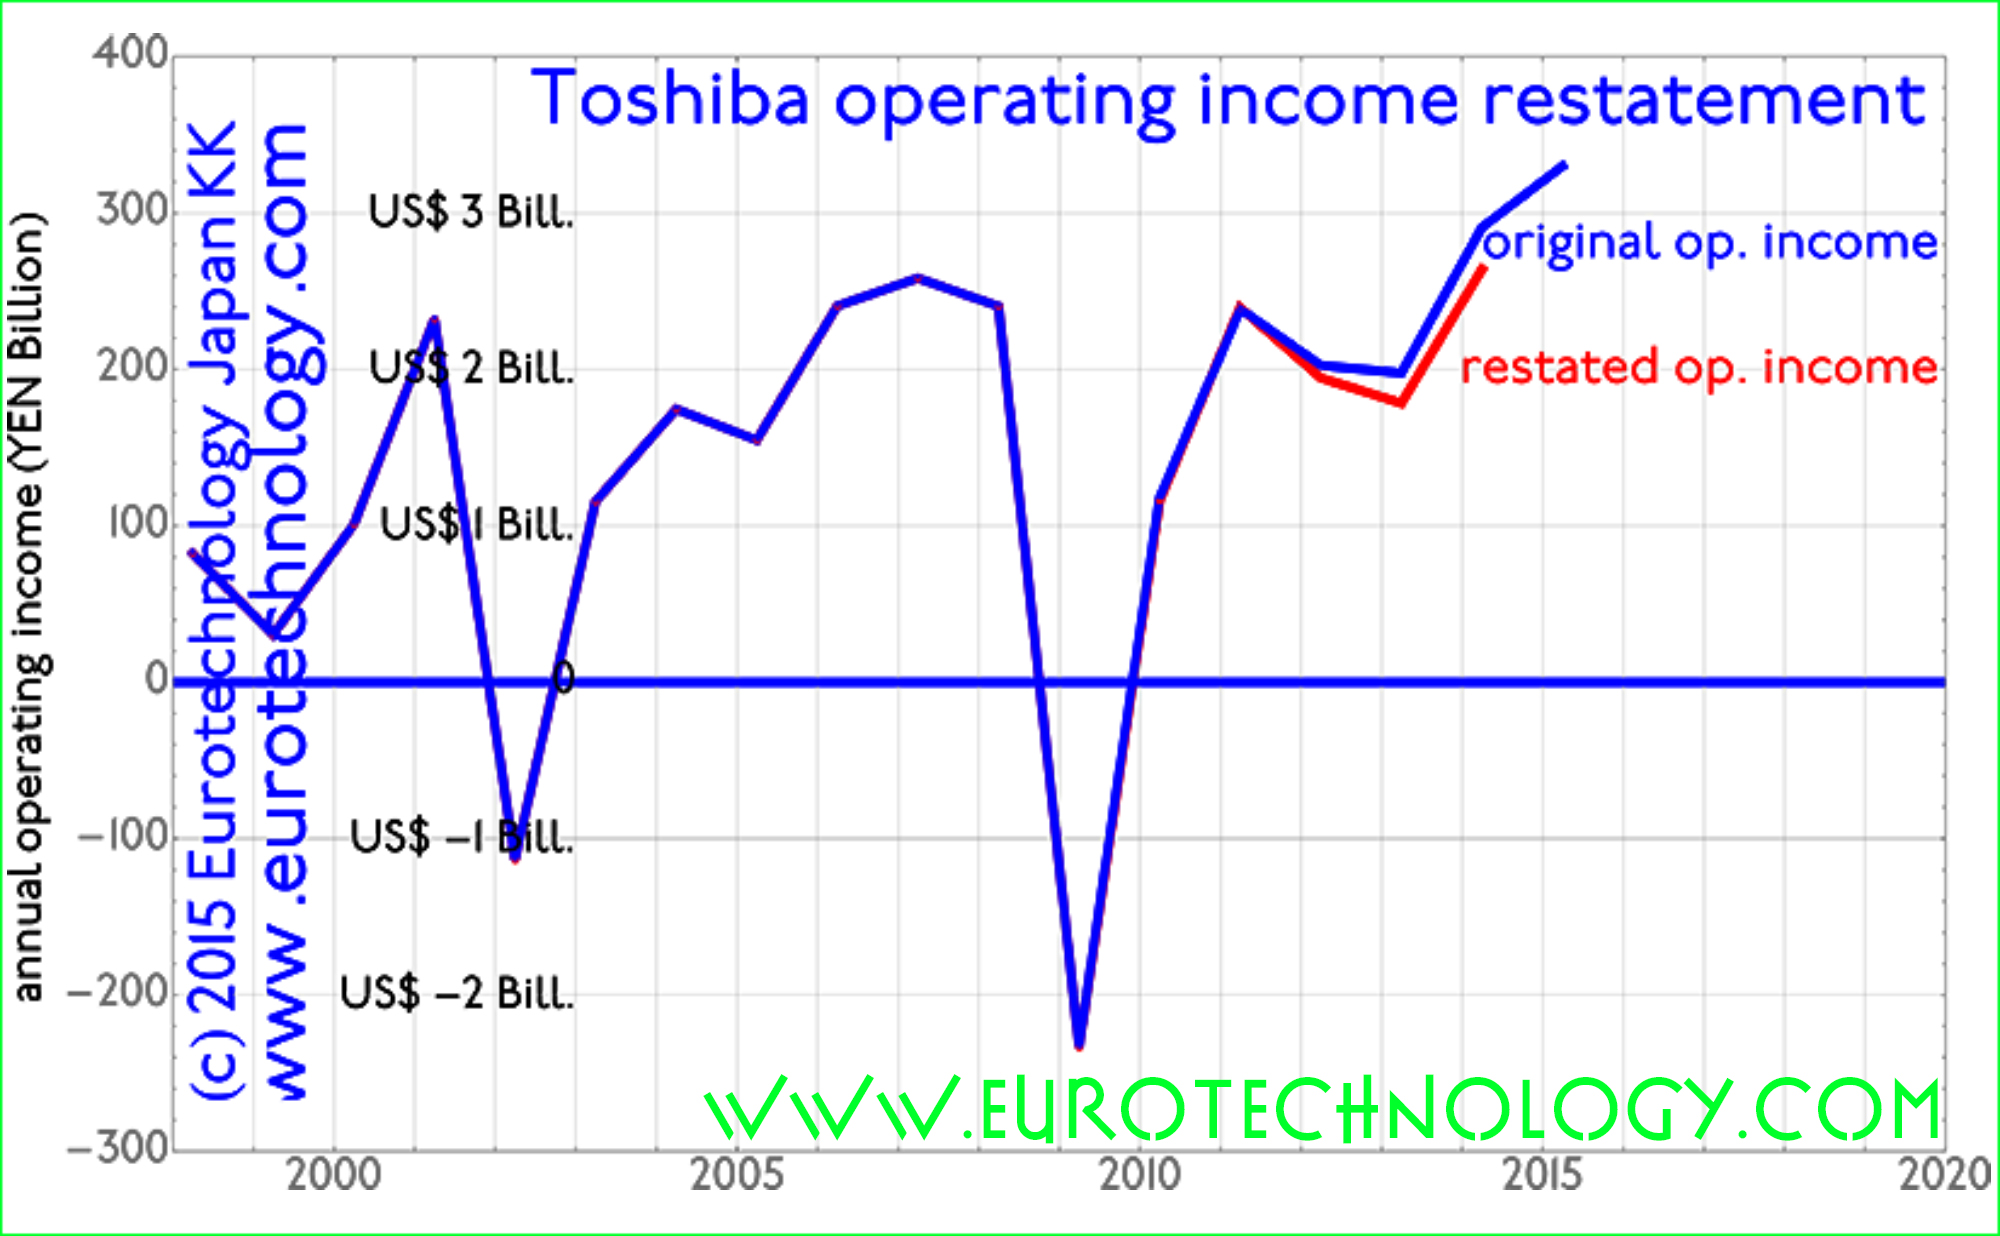 Toshiba accounting restatements in context